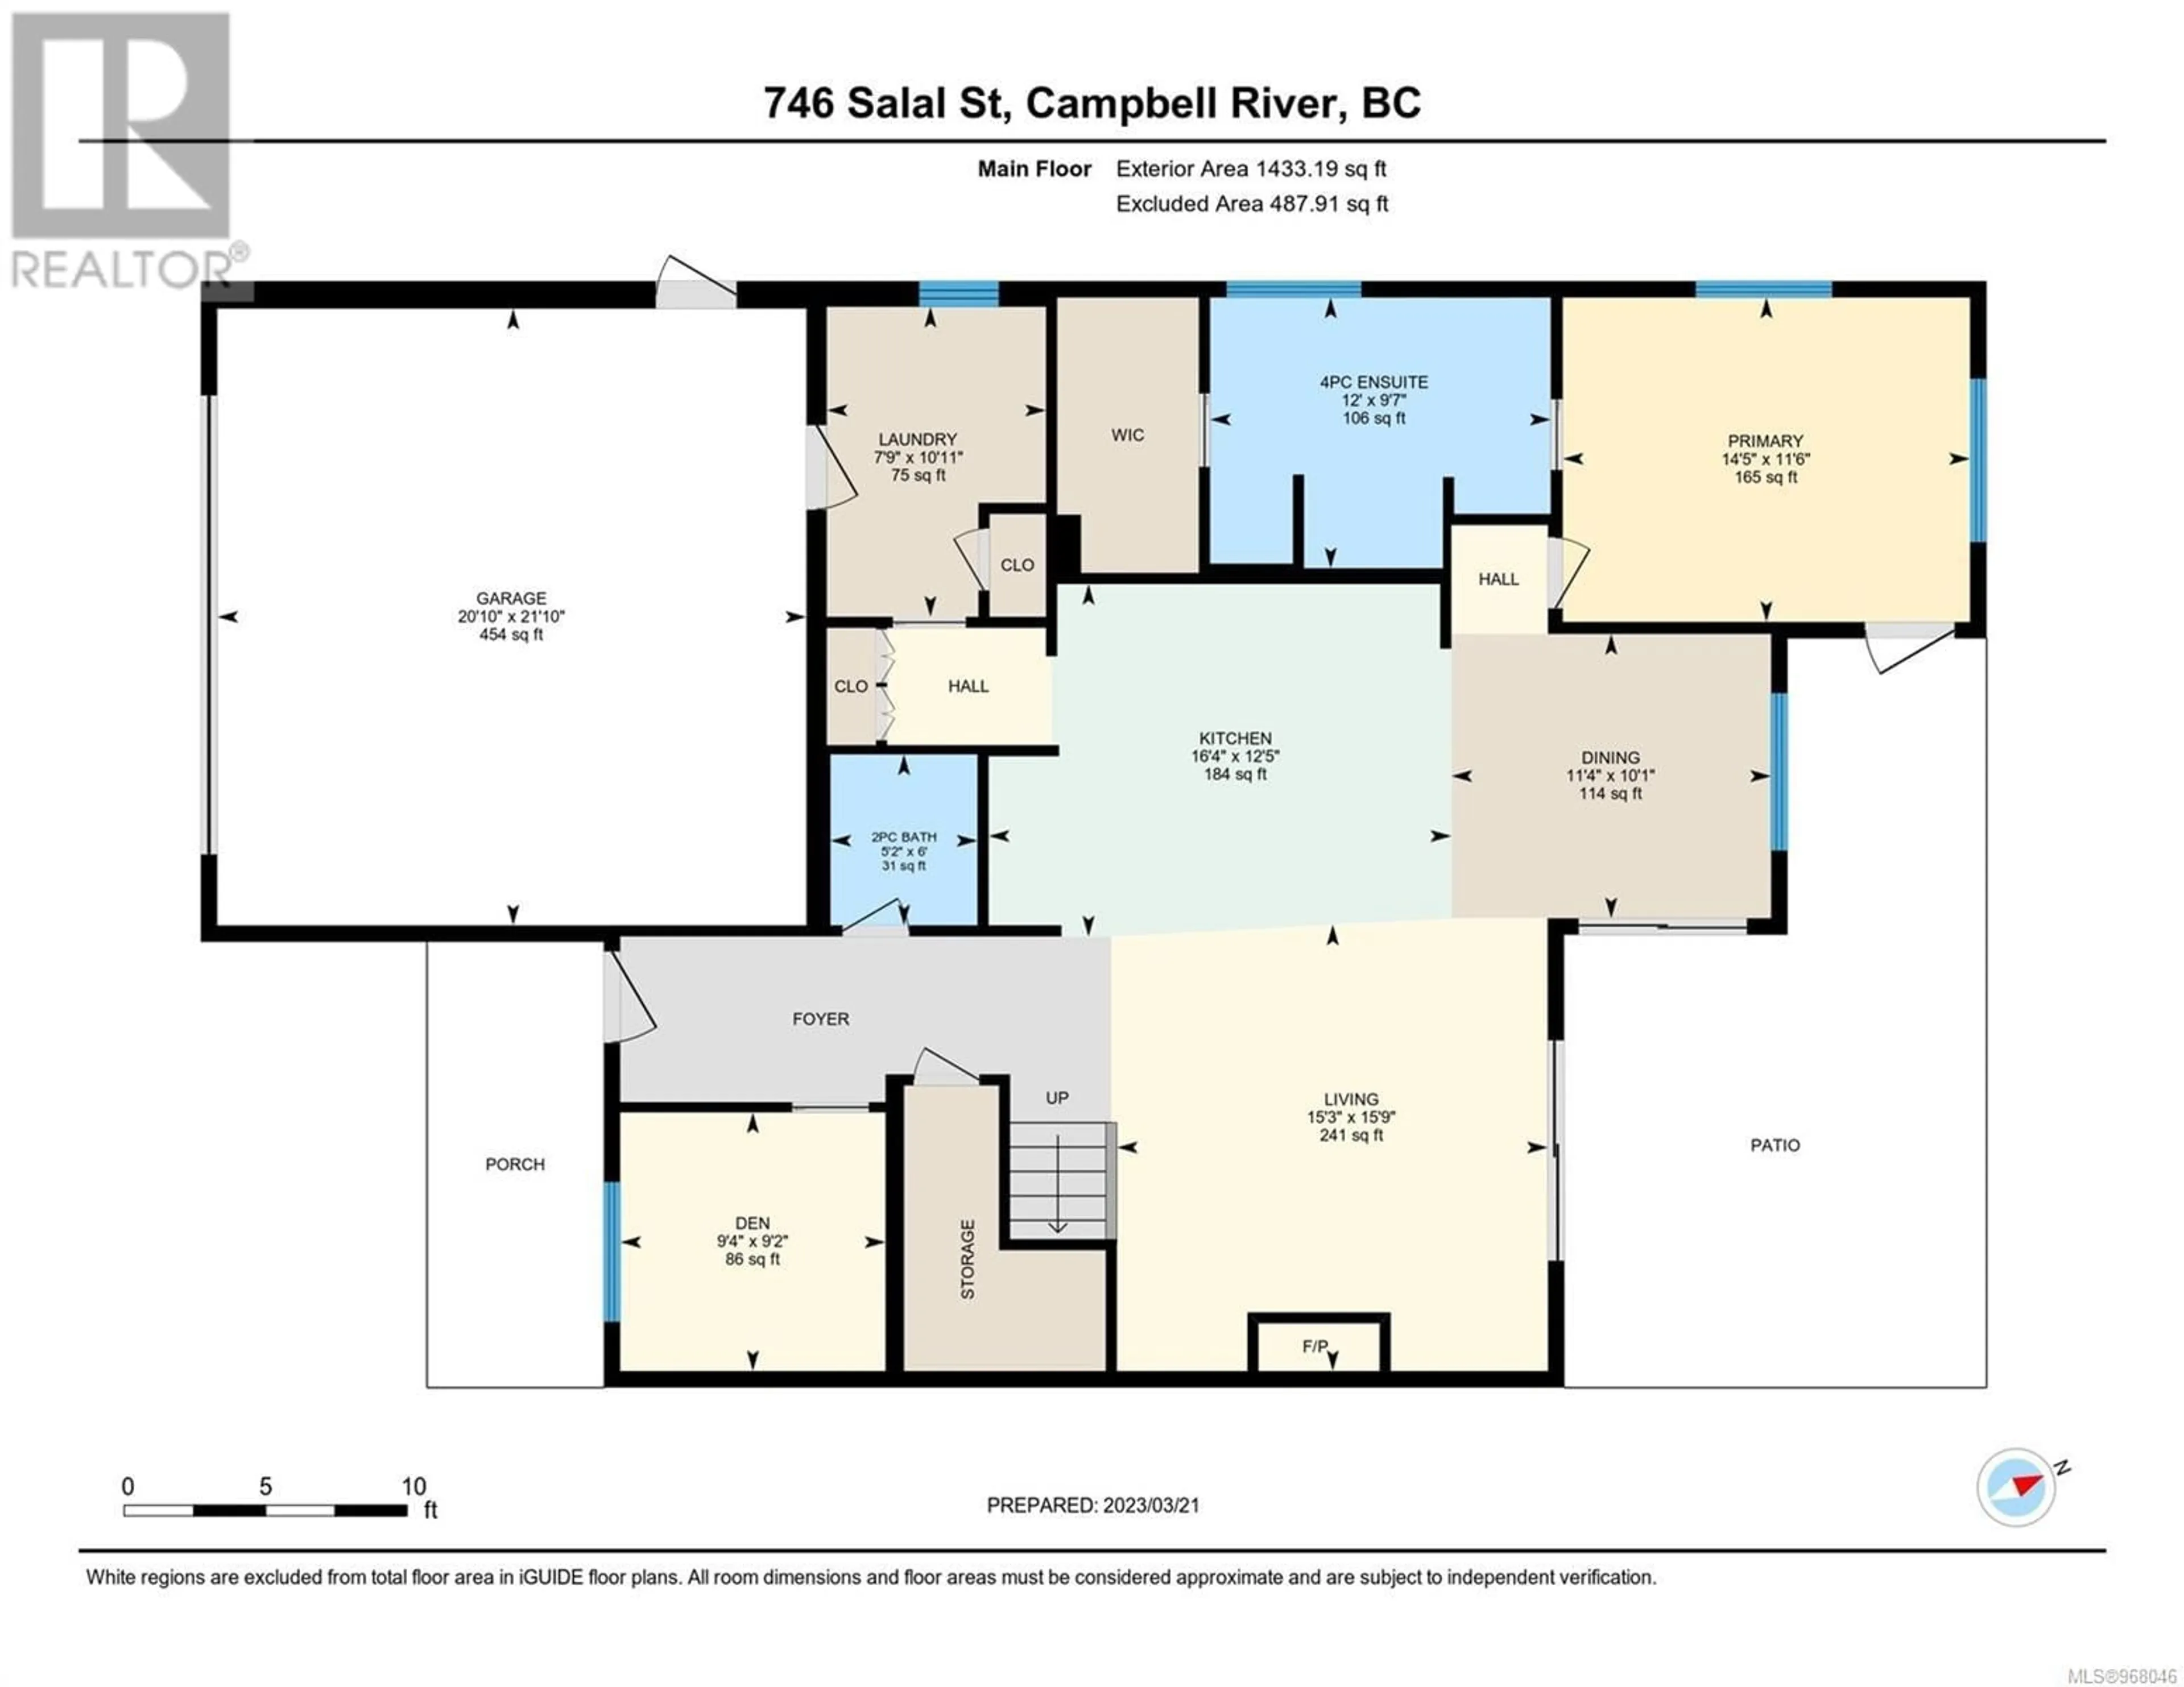 Floor plan for 746 Salal St, Campbell River British Columbia V9H0E6